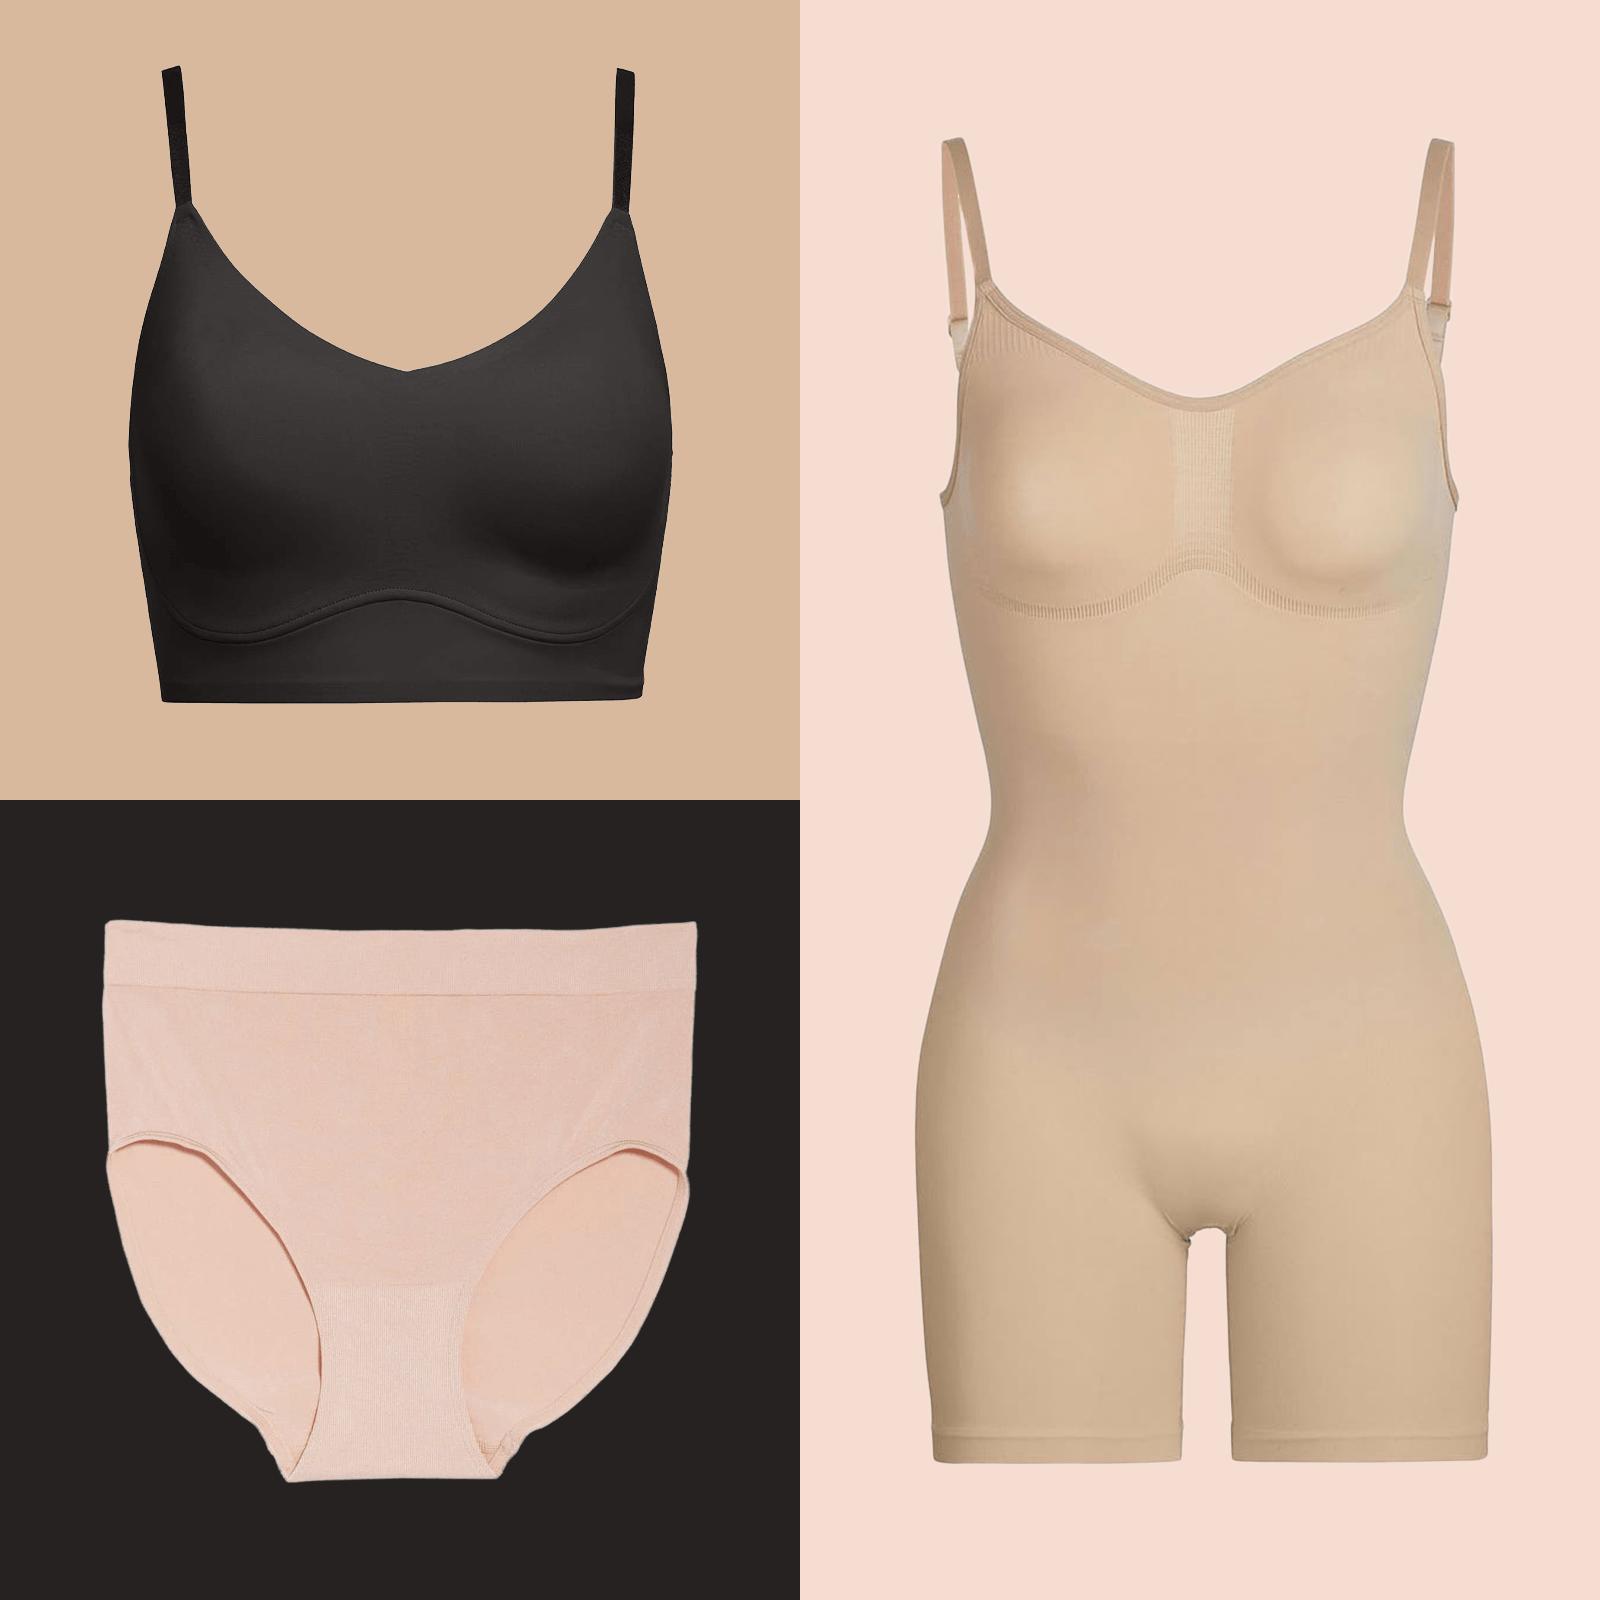 Overwhelmed by all the shapewear options? Here are the best